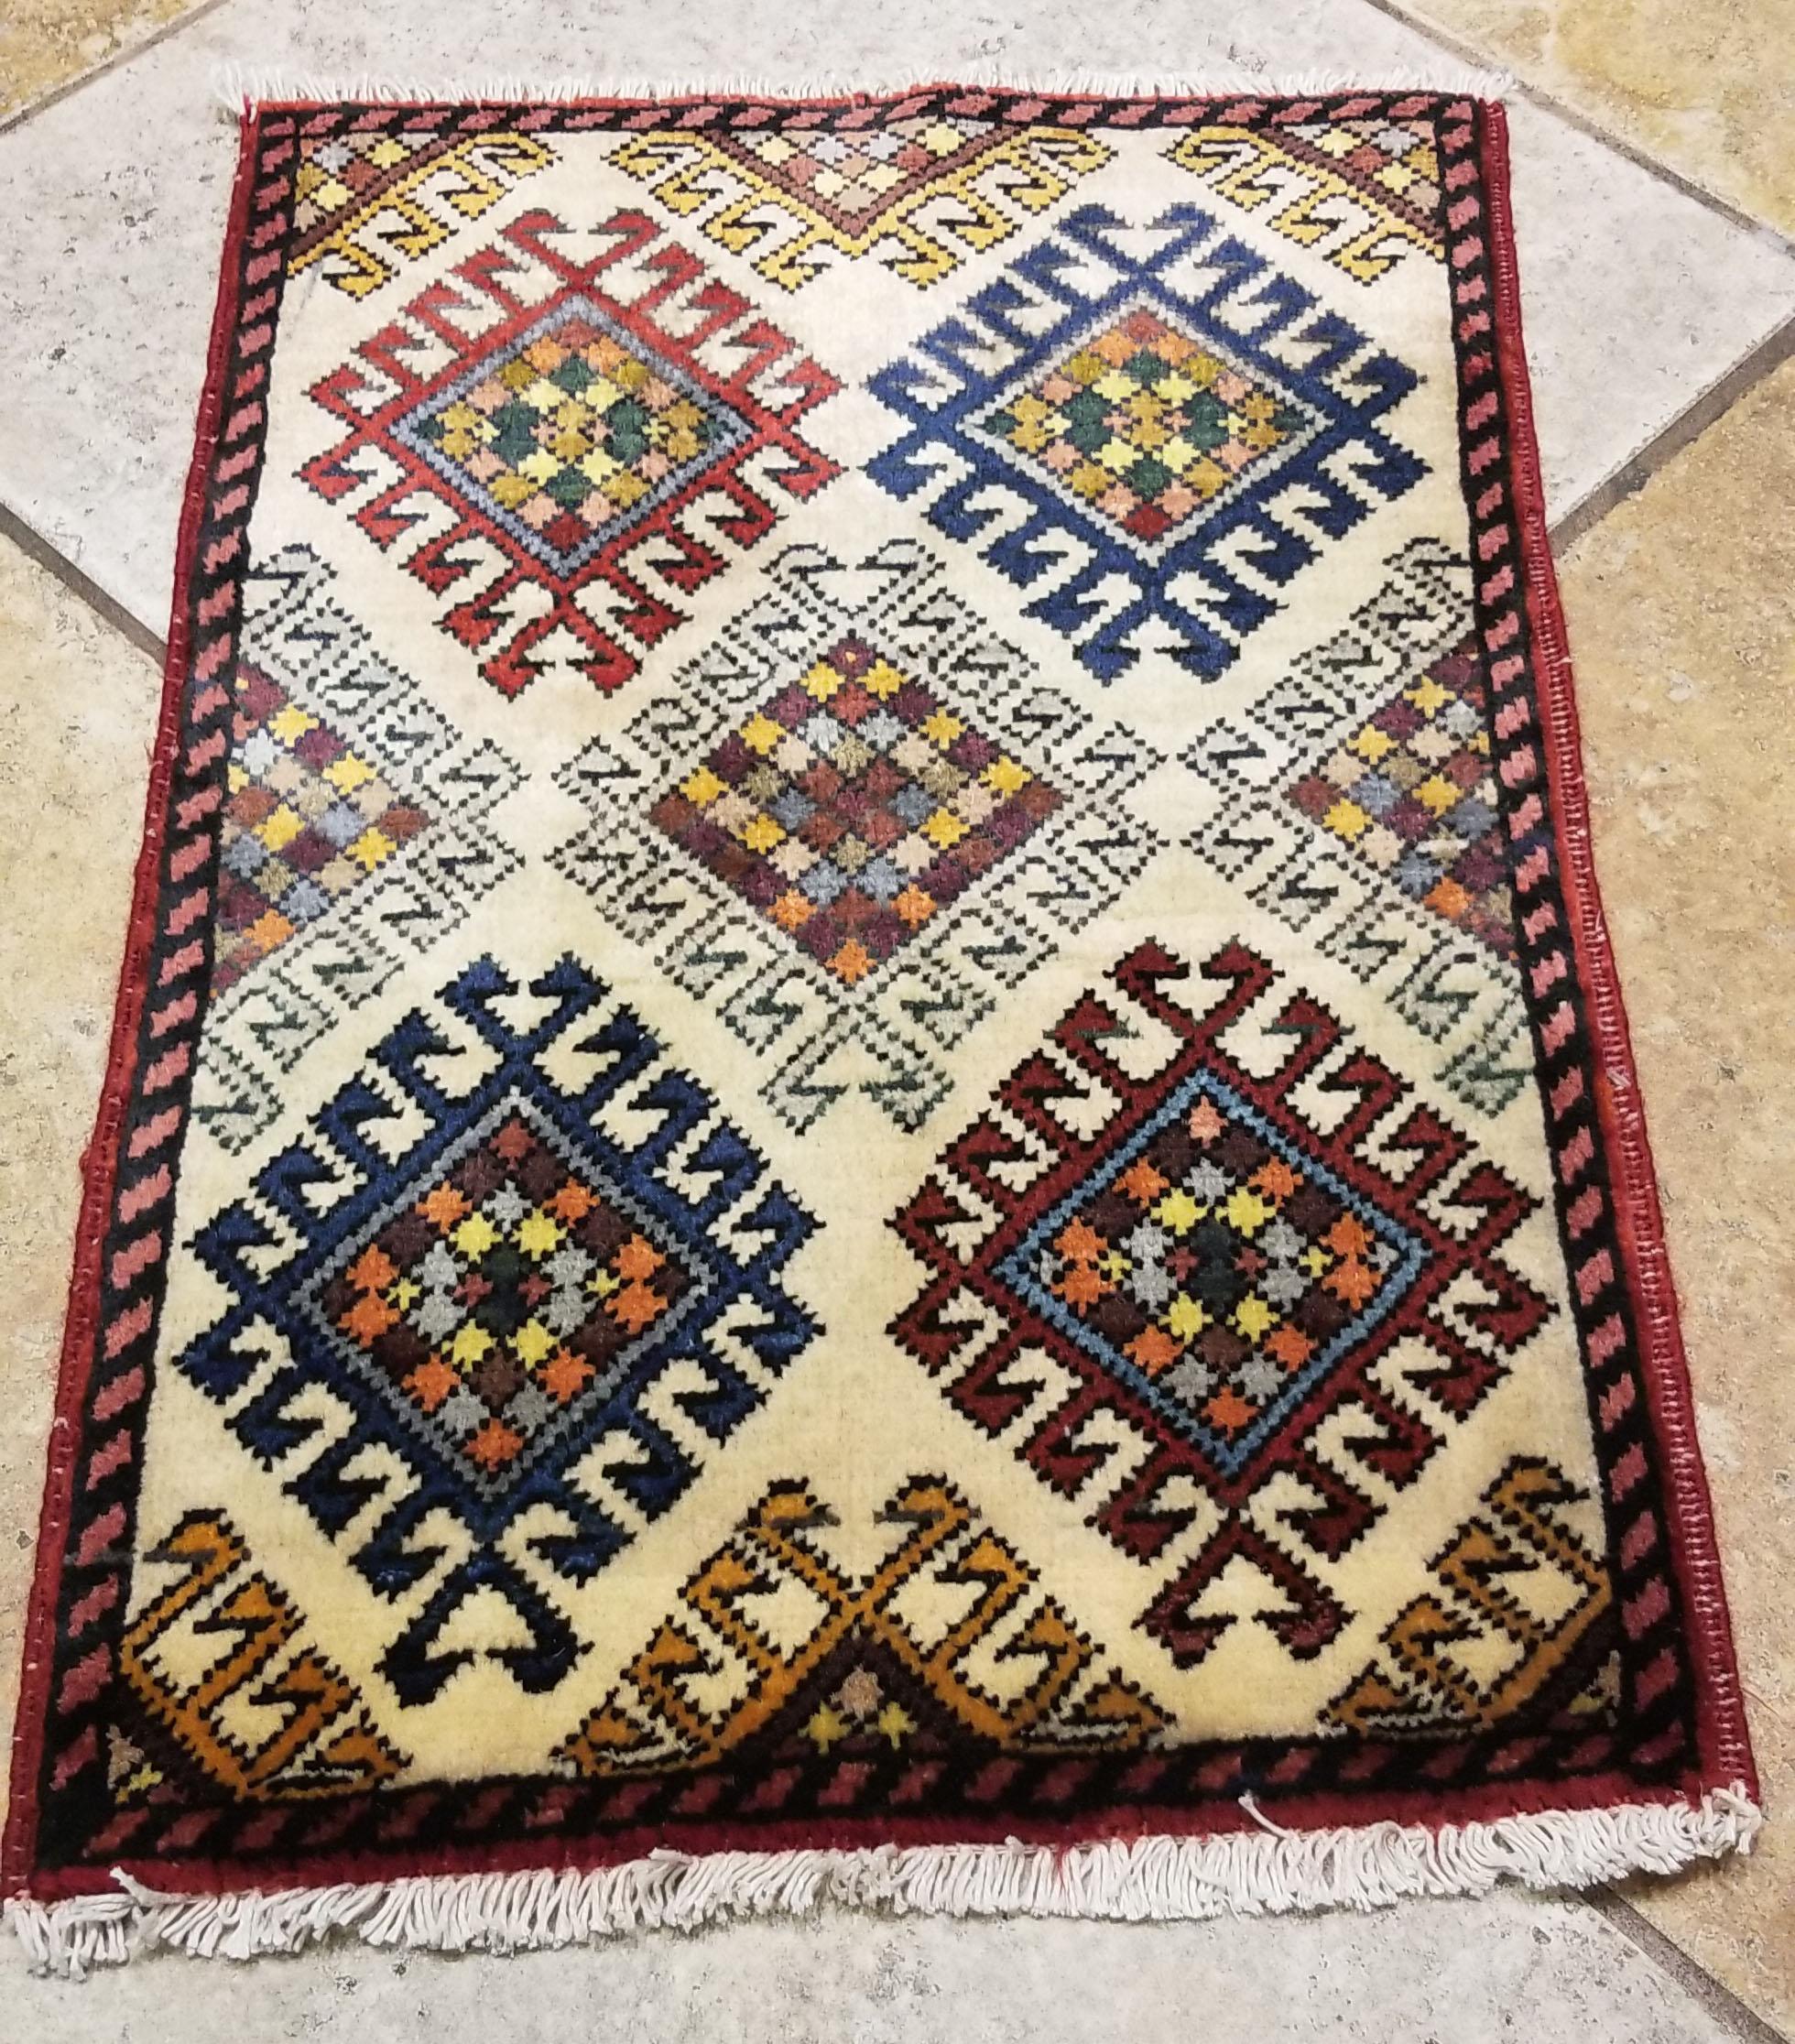 We carry some of the best Afghan bedside rugs, when you like to give your bedroom a colorful new look with one of our stunning carpets. This one measures approximately 25